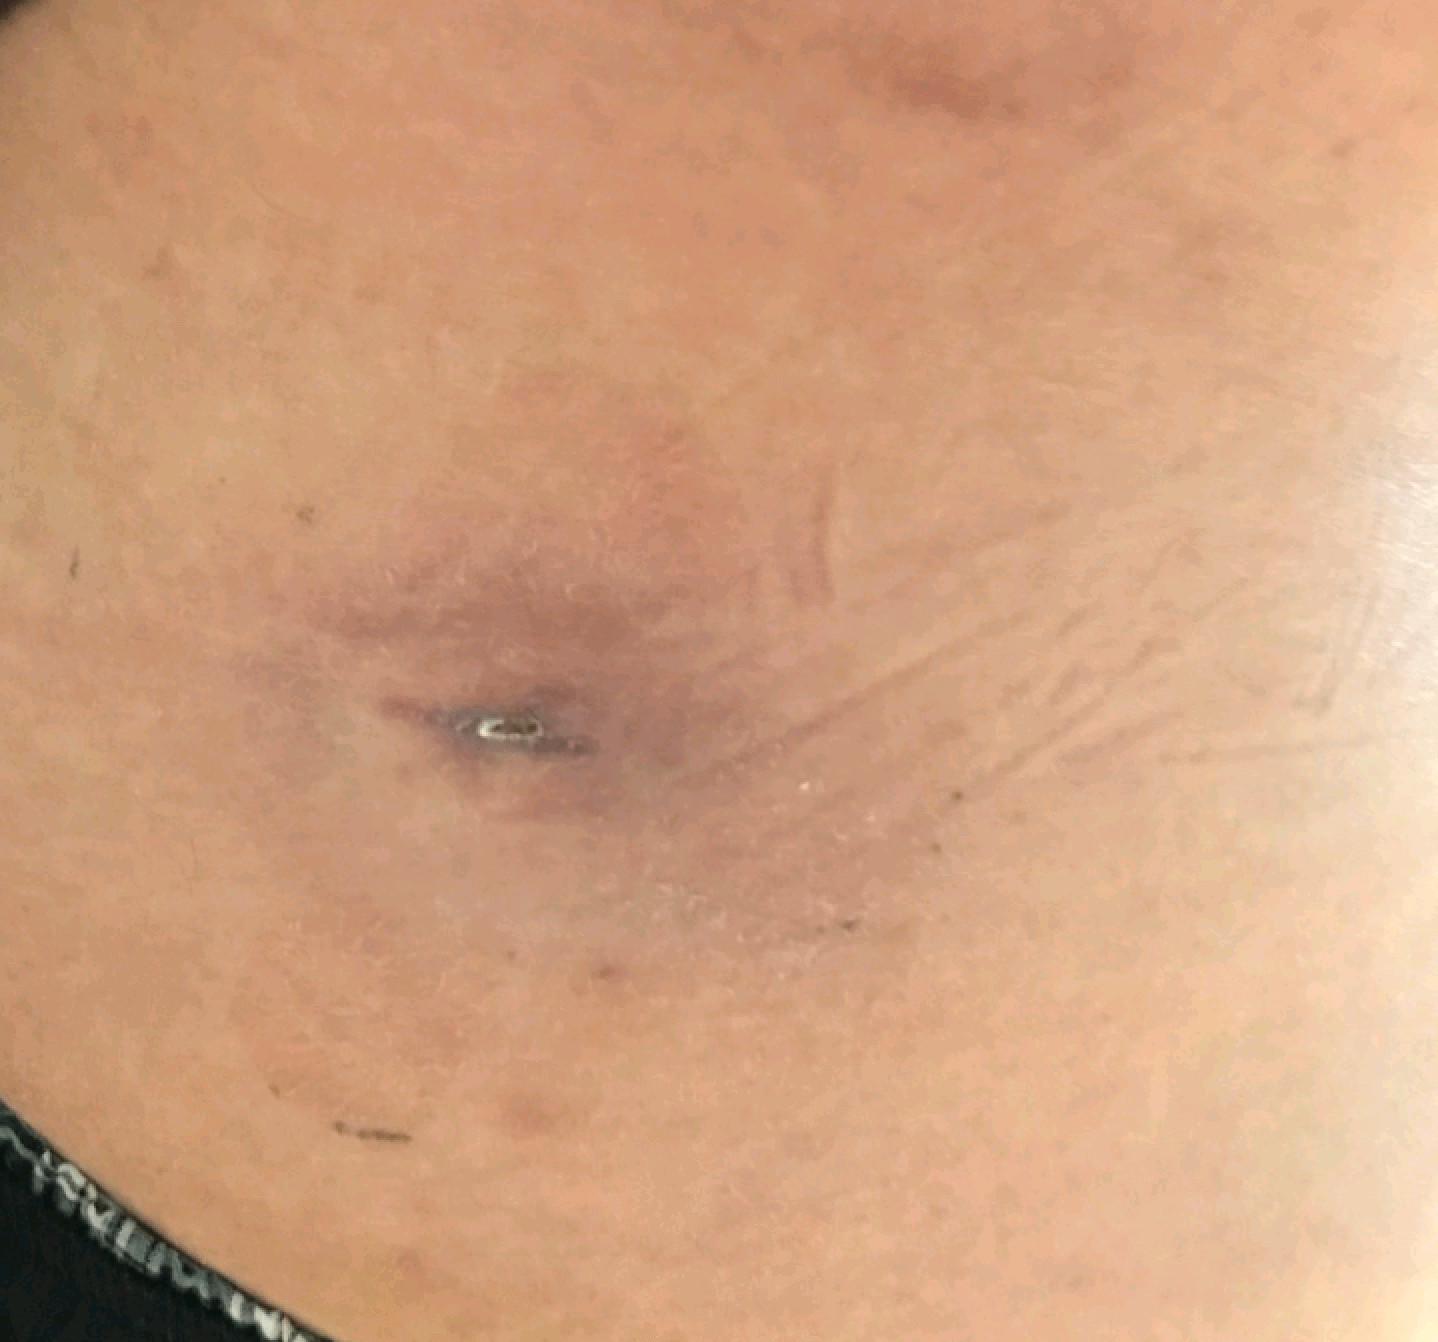 Infected Sebaceous Cyst